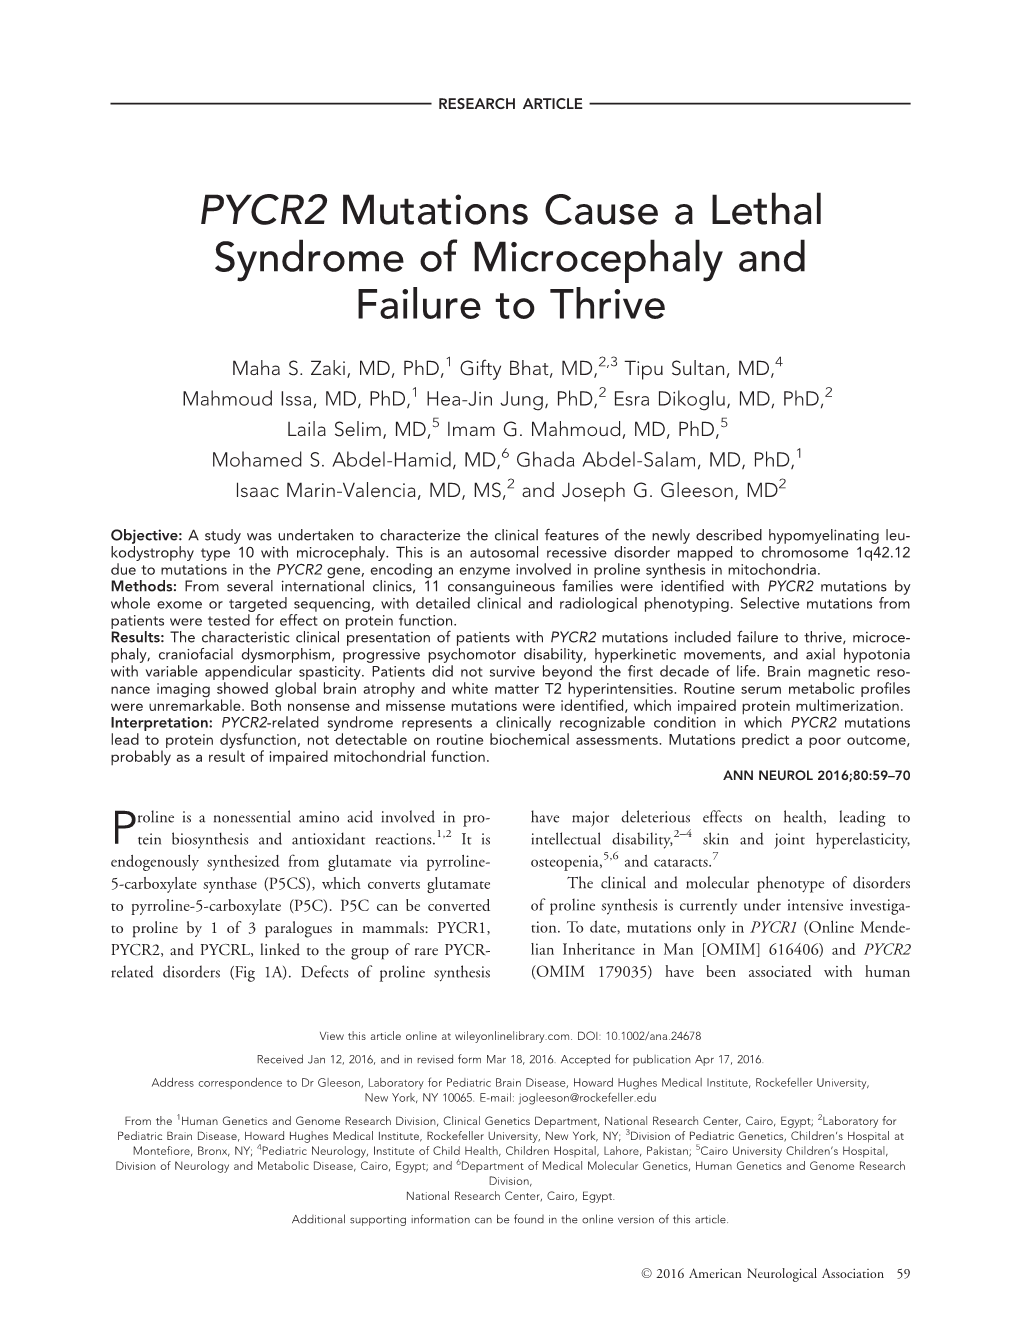 PYCR2 Mutations Cause a Lethal Syndrome of Microcephaly and Failure to Thrive